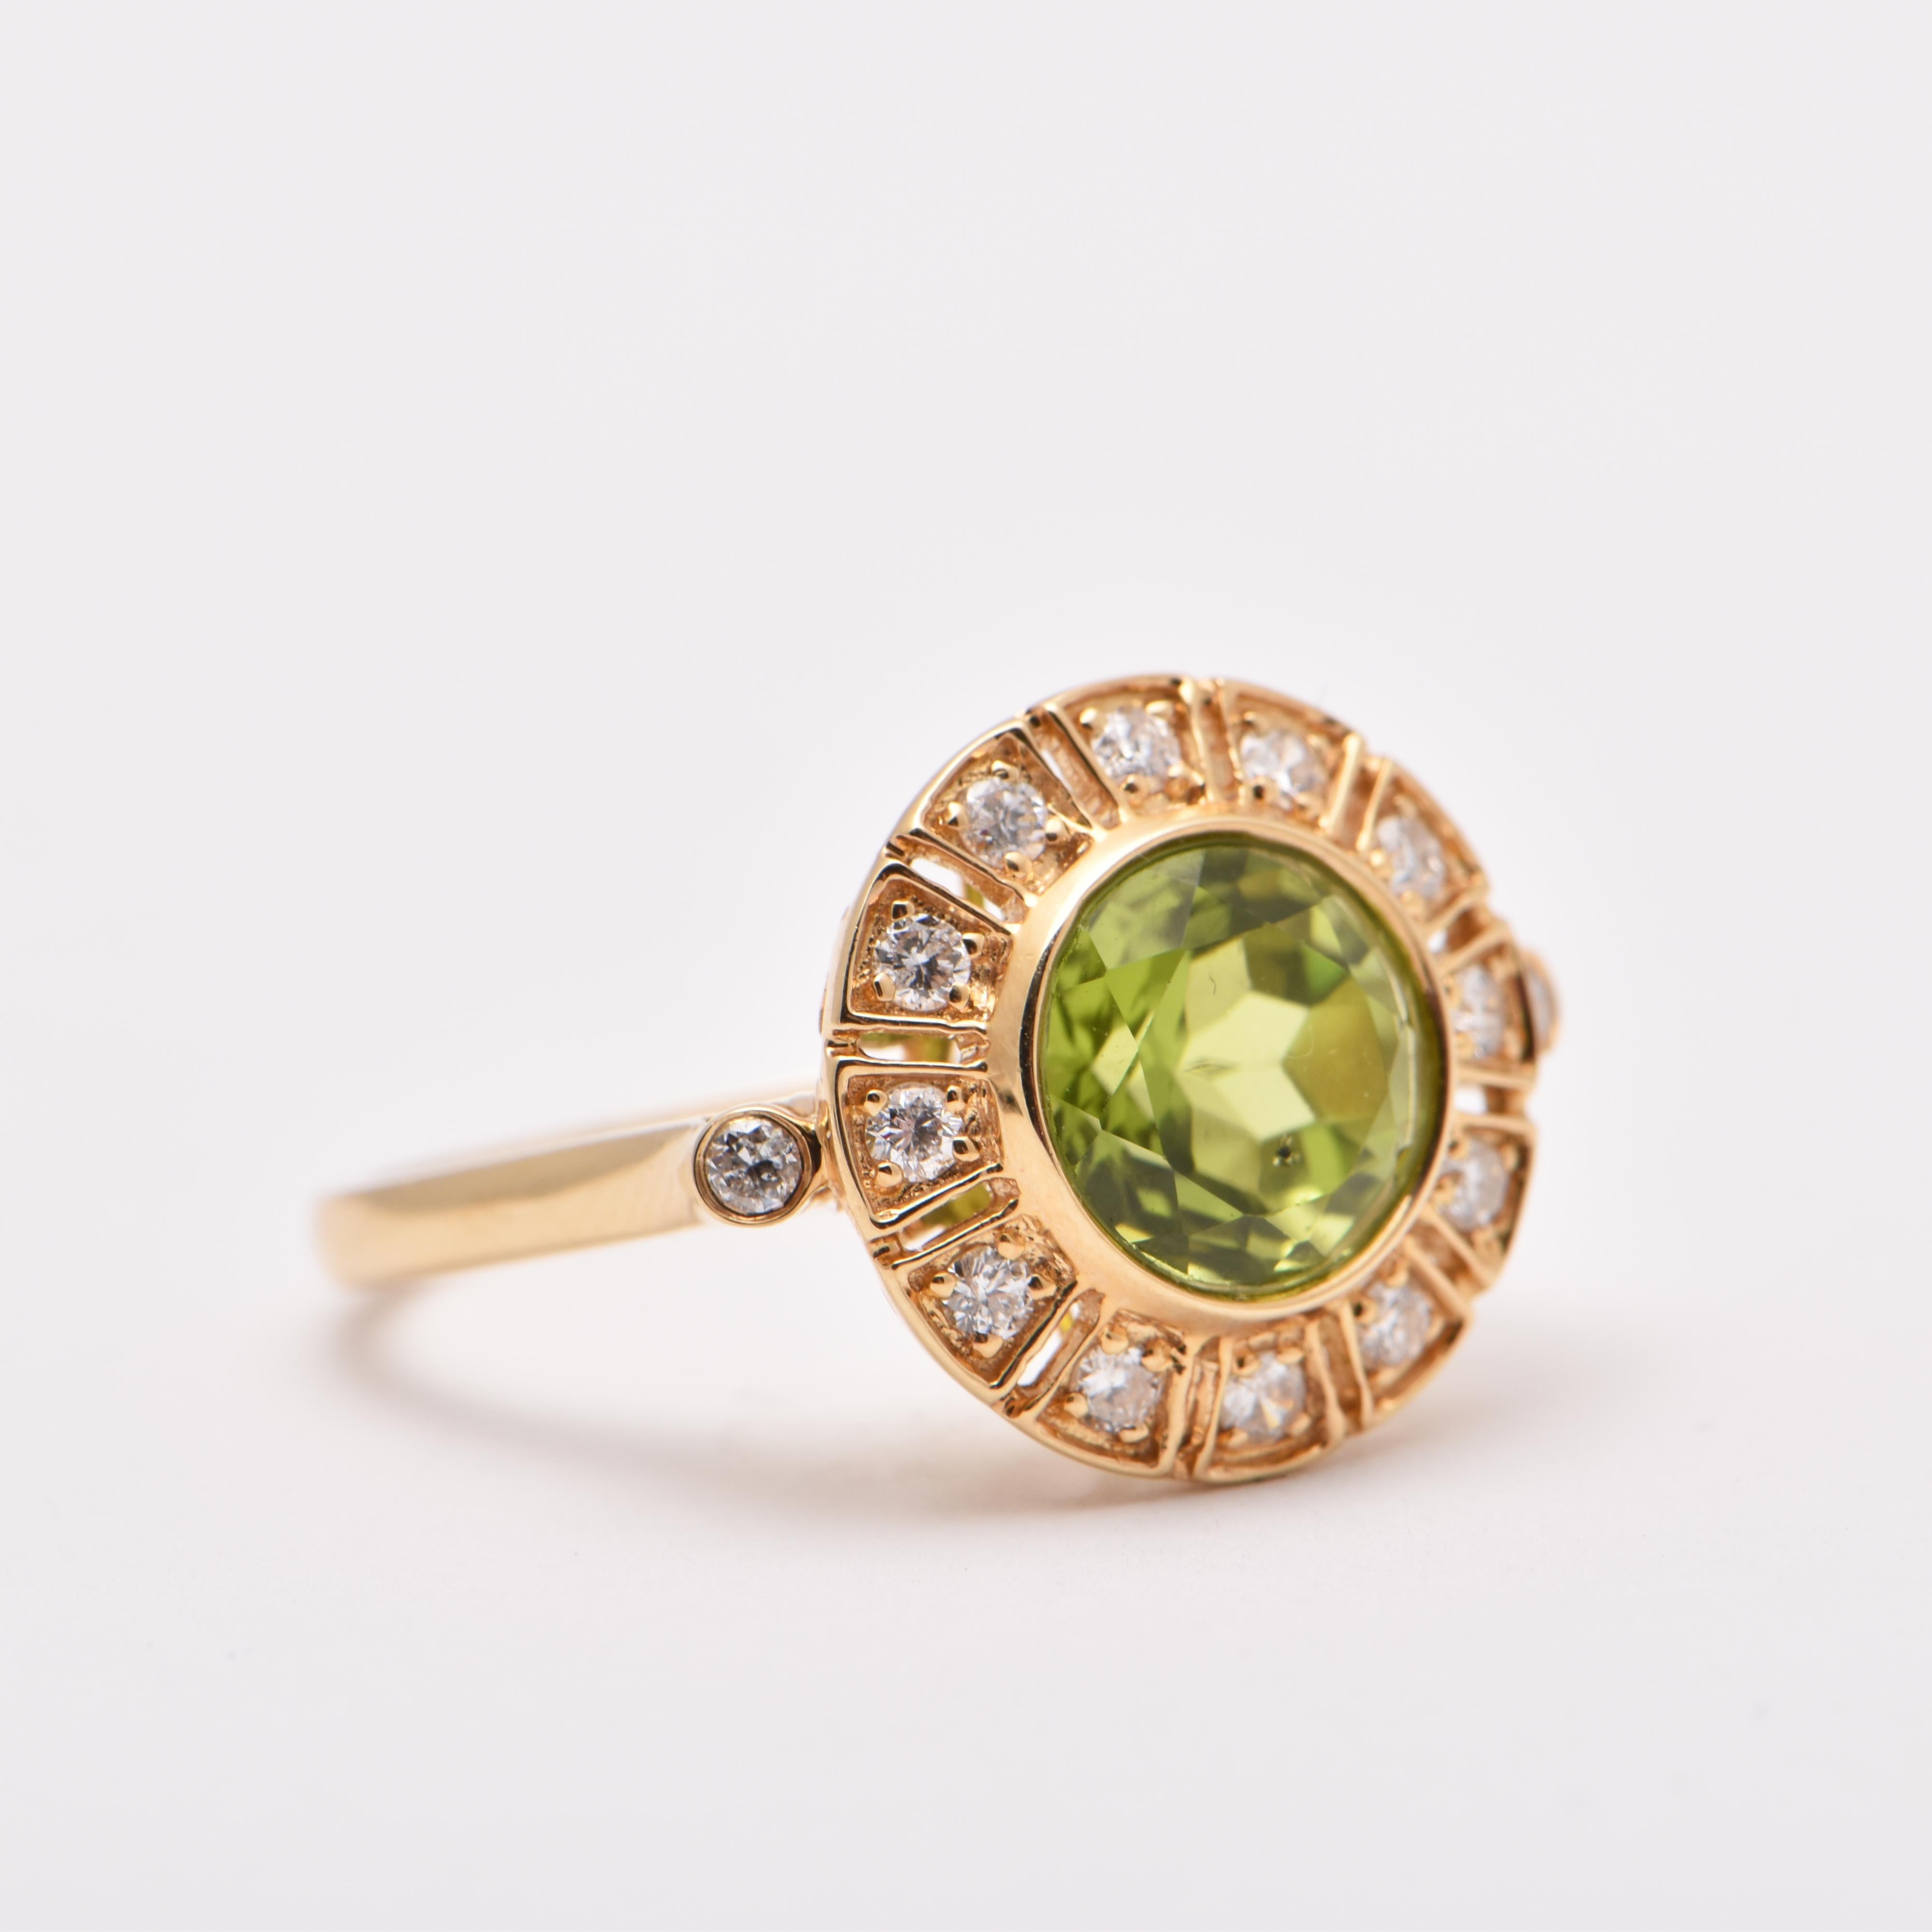 Round Peridot and Diamond Cocktail Ring in 18 Carat Yellow Gold by Cartmer Jewellery

Size M-N 

Peridot 2.55 Carats
42 Diamonds totalling 0.31 Carats
18 Carat Yellow Gold Ring

FREE express postage usually 3-4 days Sydney to New York
FREE